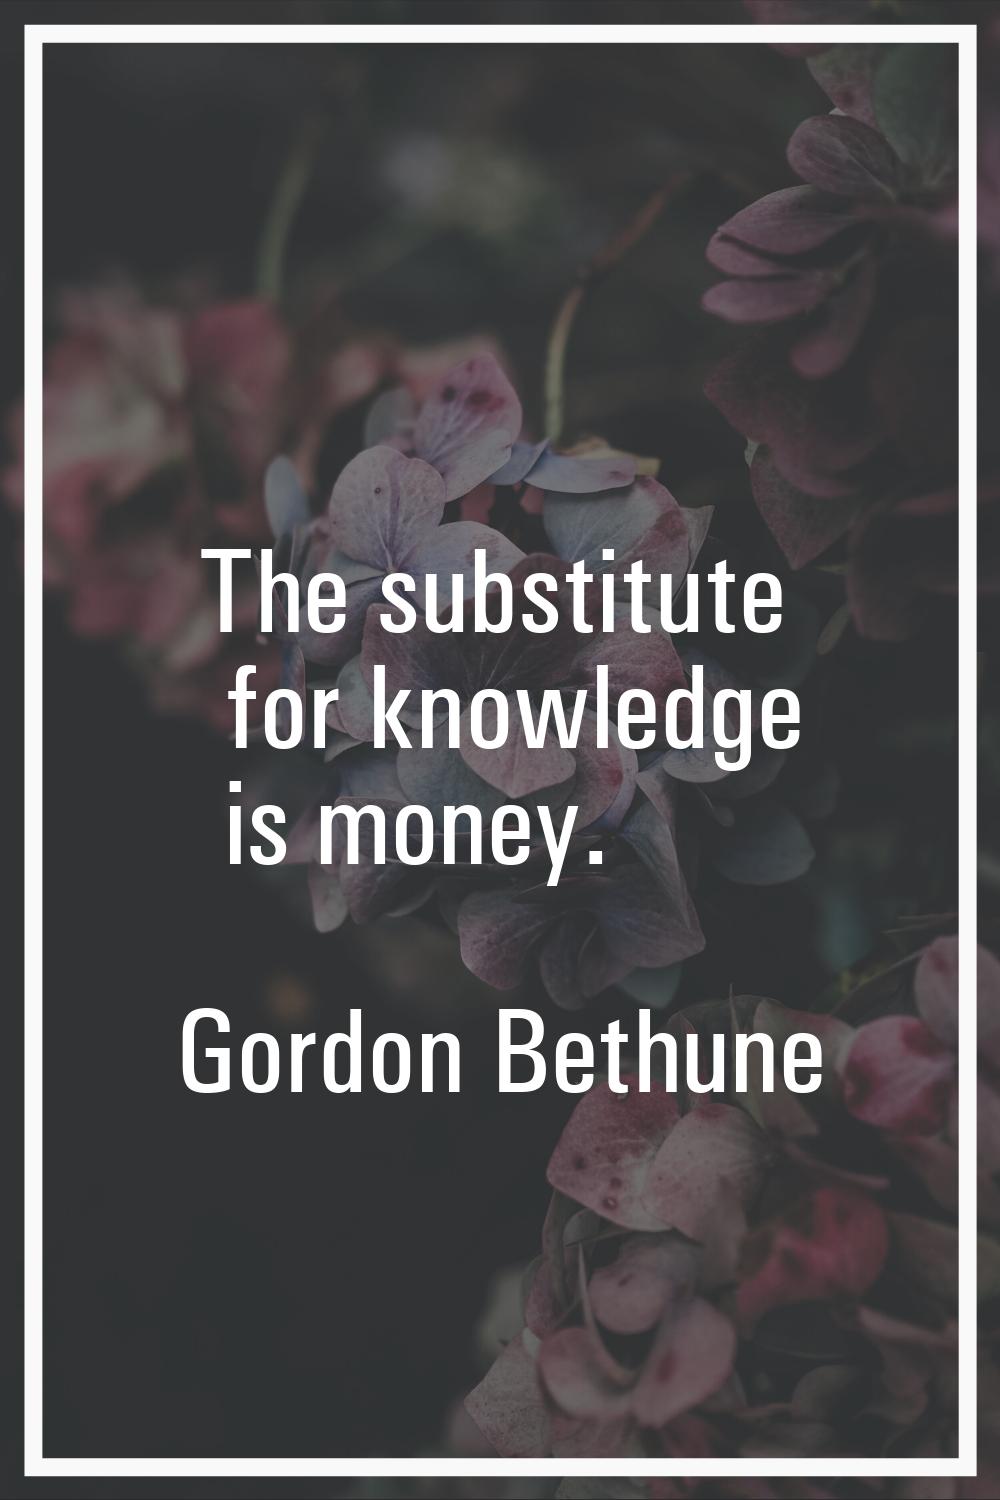 The substitute for knowledge is money.